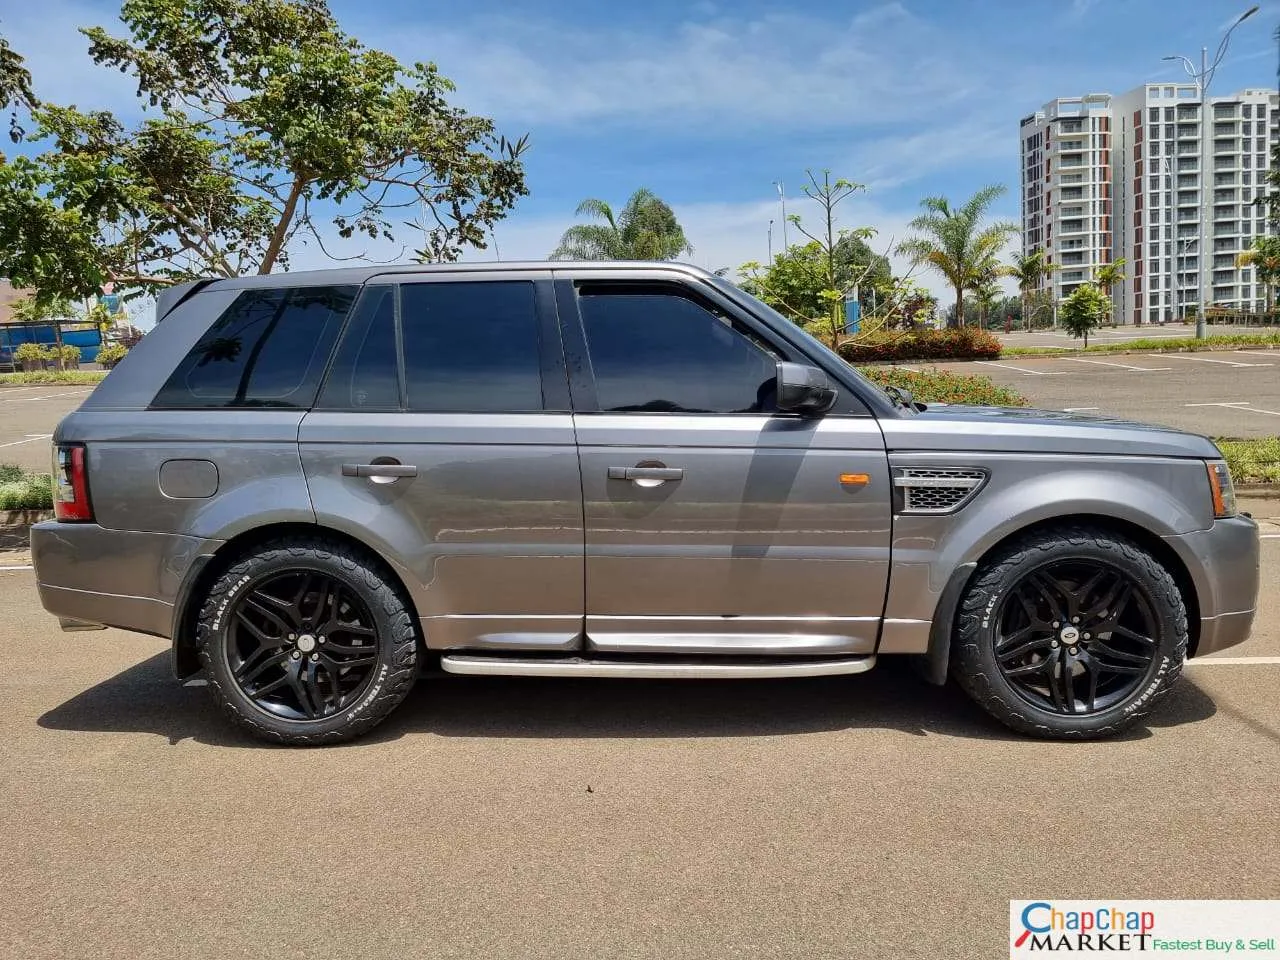 Cars Cars For Sale/Vehicles-Range Rover Sport SUPER CHARGE 🔥 You pay 30% deposit Trade in OK Cheapest QUICK SALE 9